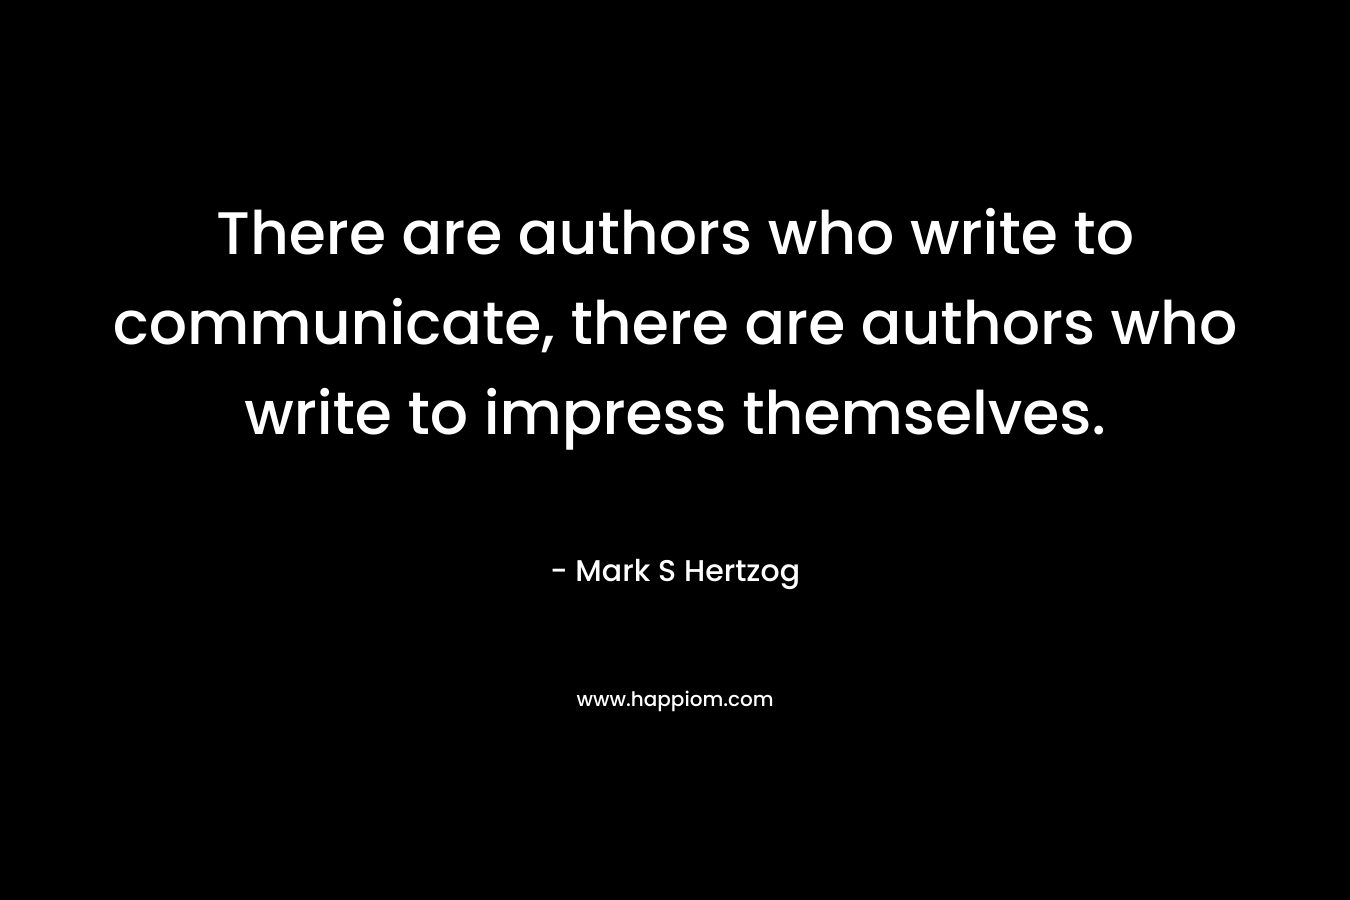 There are authors who write to communicate, there are authors who write to impress themselves.